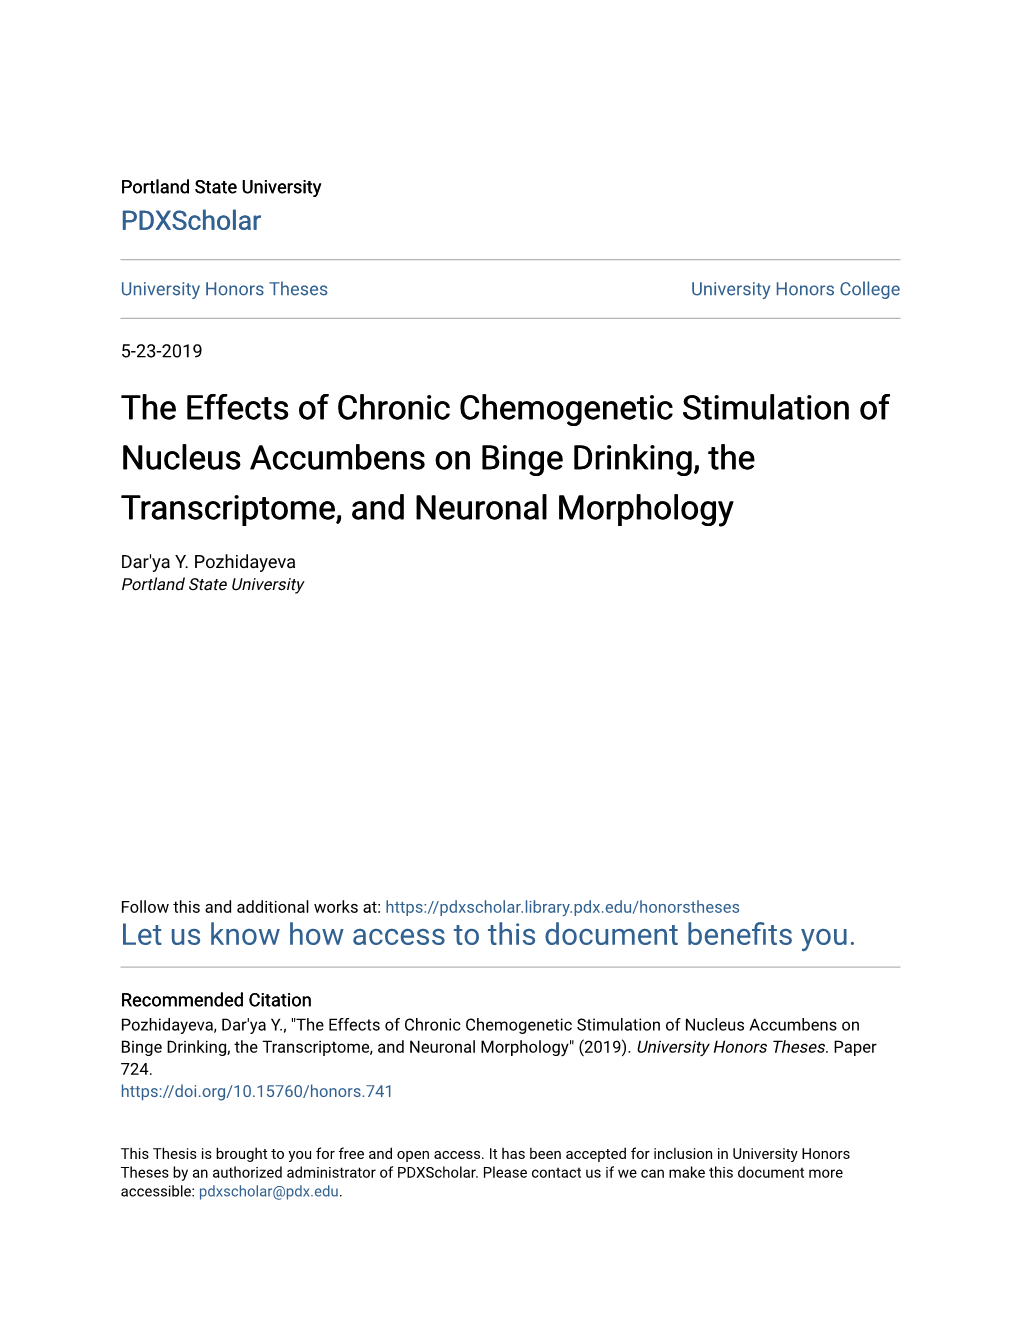 The Effects of Chronic Chemogenetic Stimulation of Nucleus Accumbens on Binge Drinking, the Transcriptome, and Neuronal Morphology